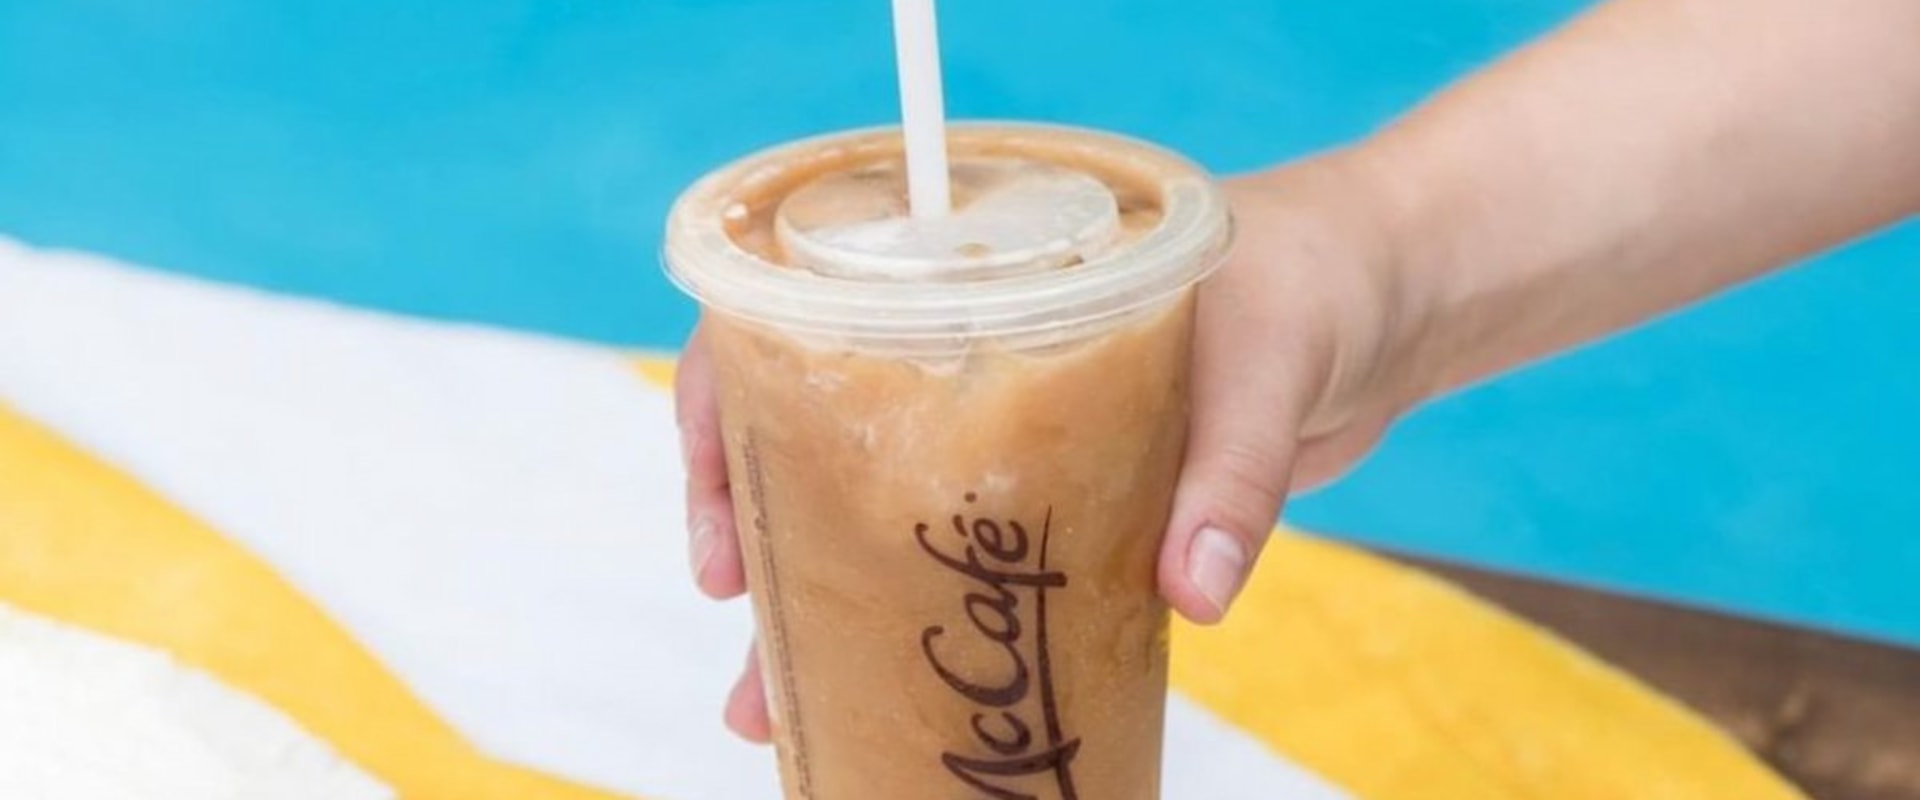 How Much Caffeine is in a McDonald's Iced Coffee?